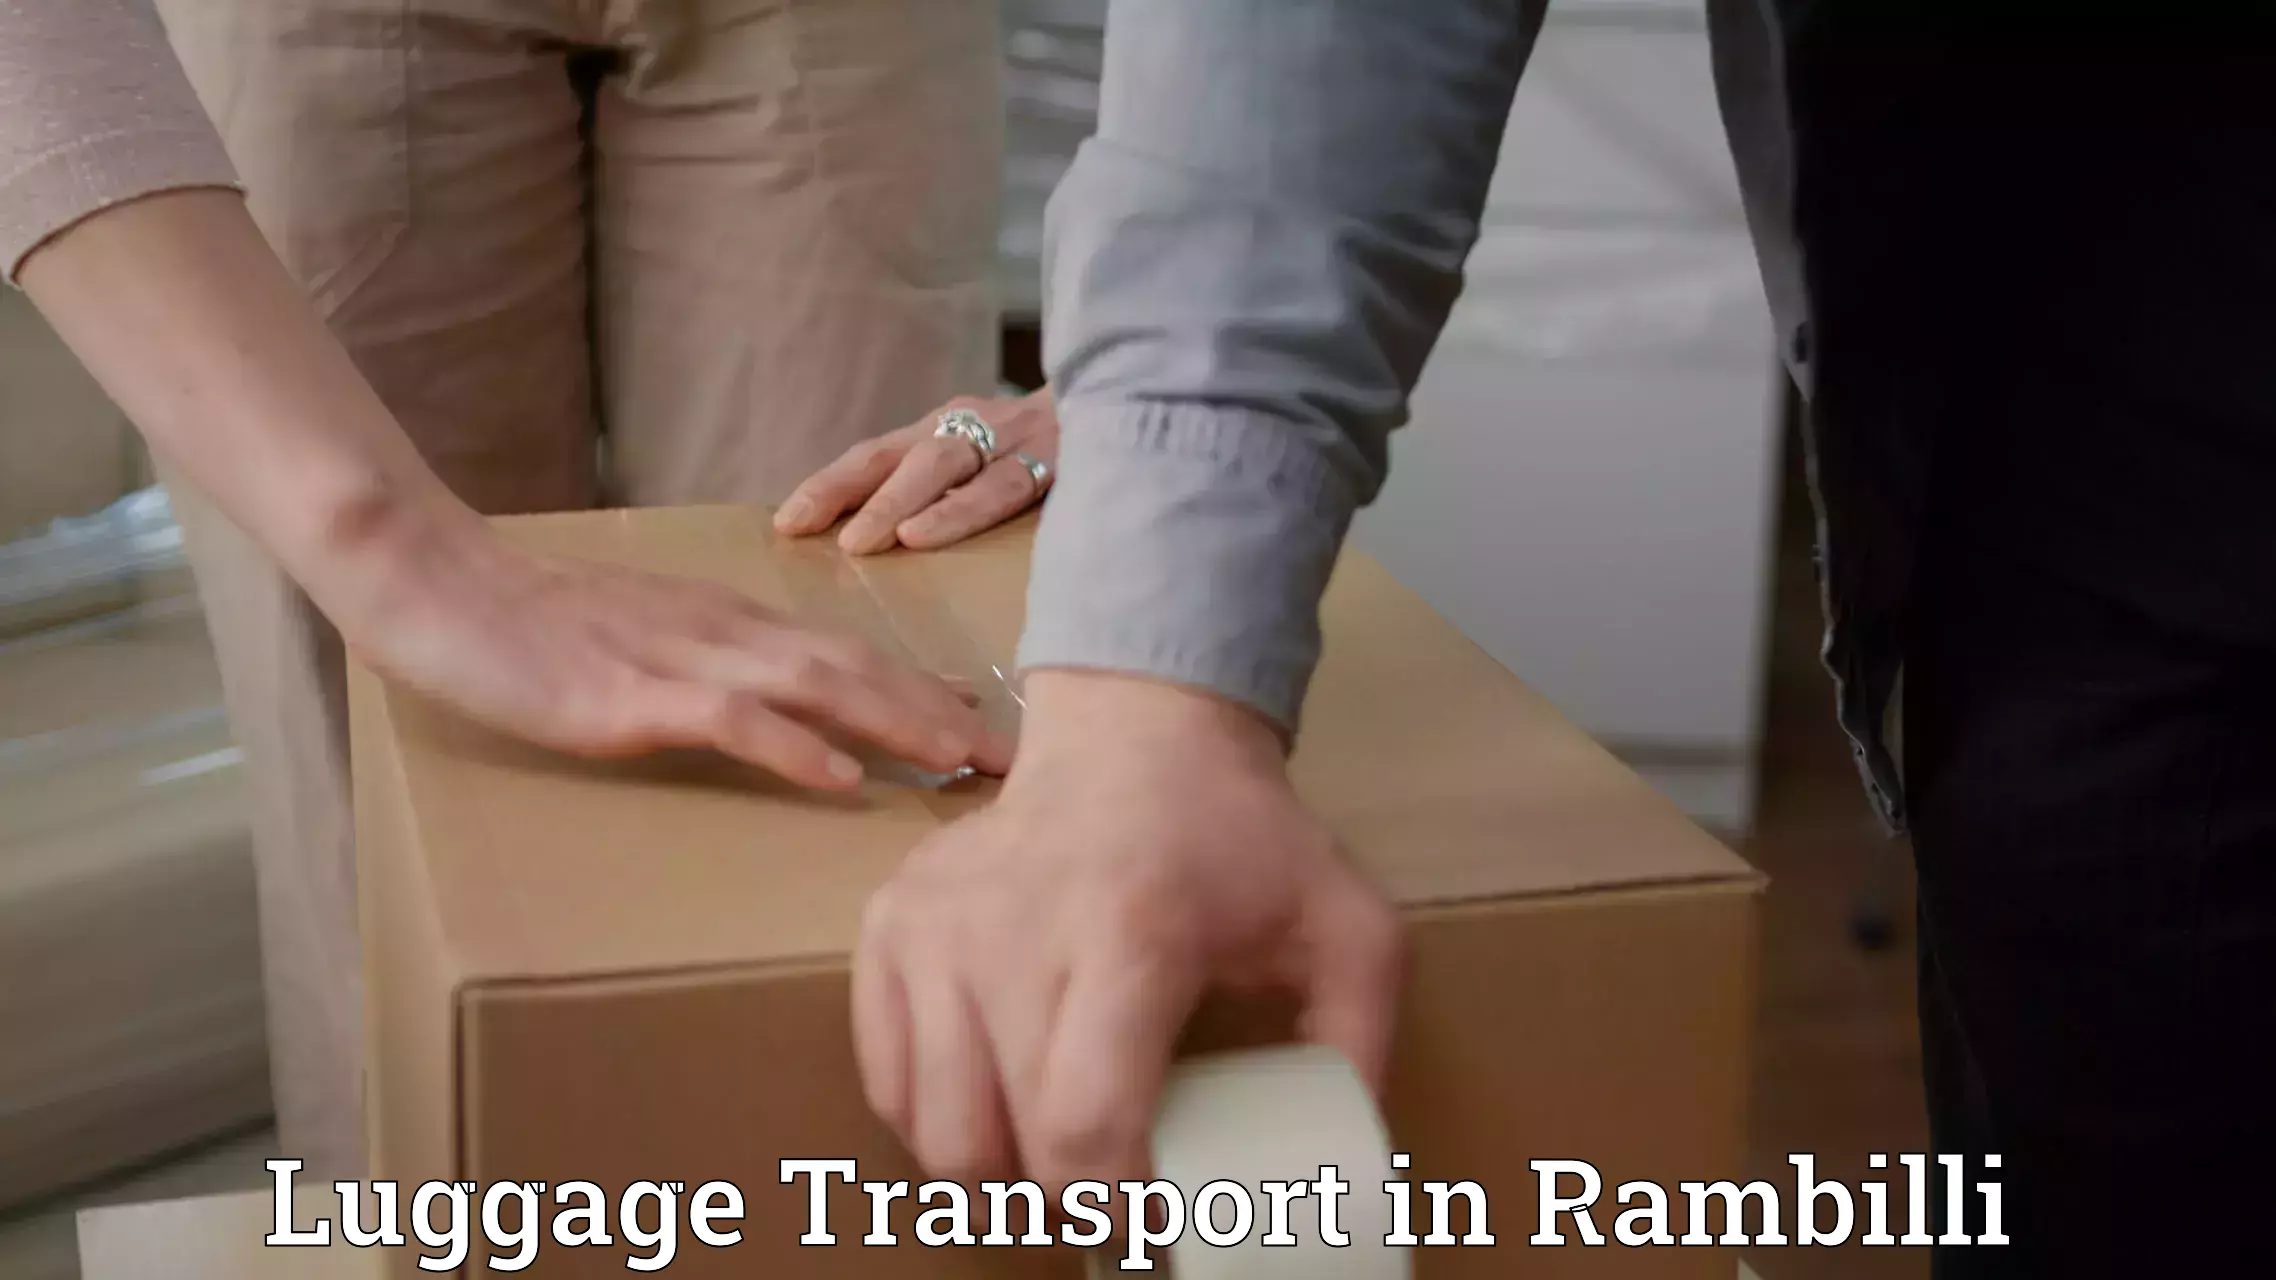 Luggage transport tips in Rambilli